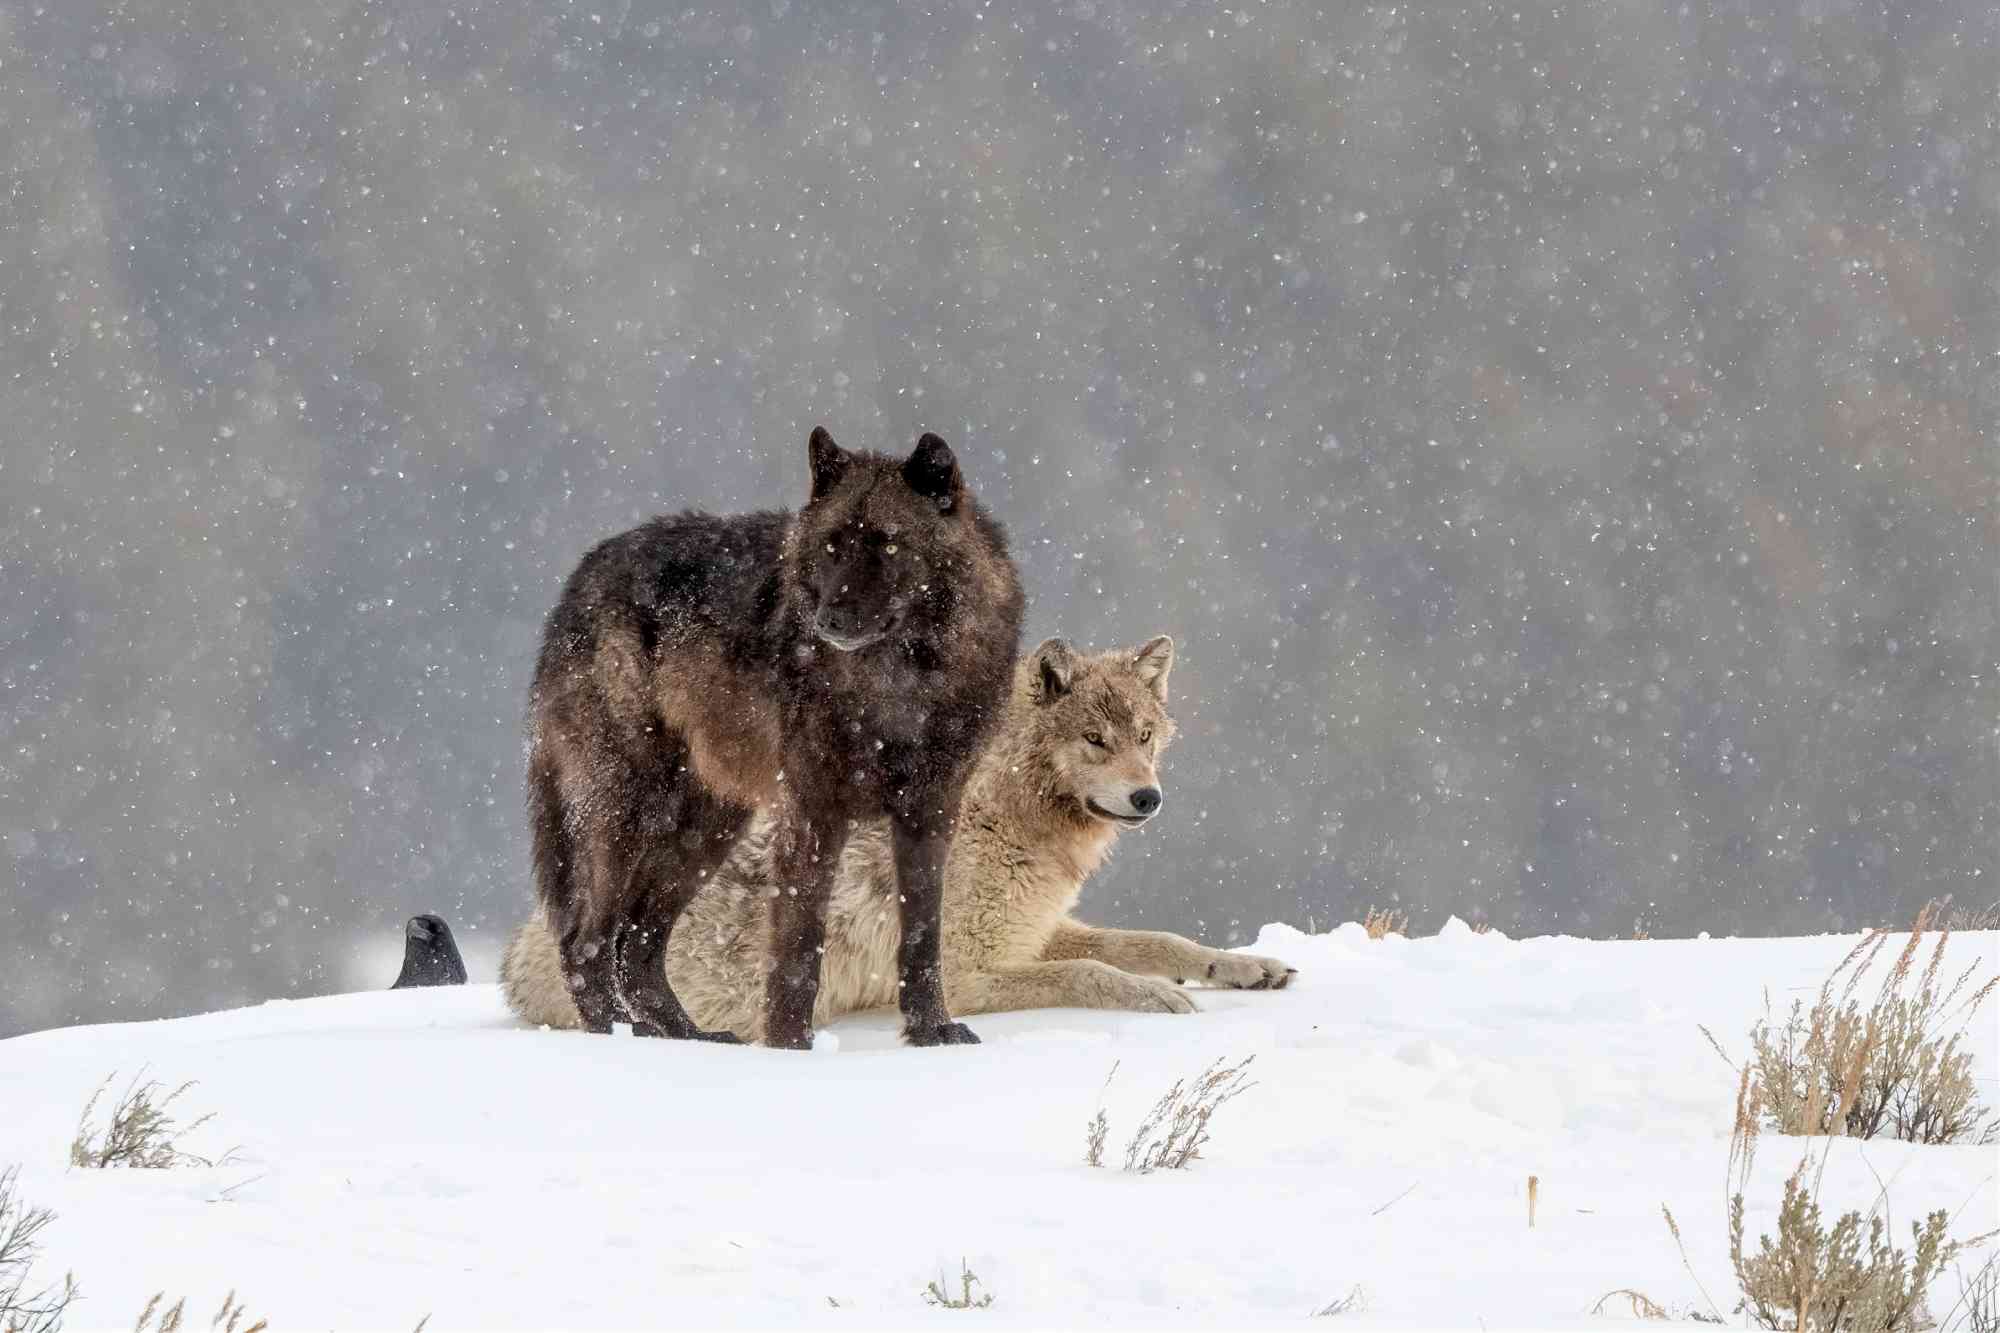 2021.03.27 - Wolves in the Snow - Yellowstone National Park - Wyoming - John Morrison